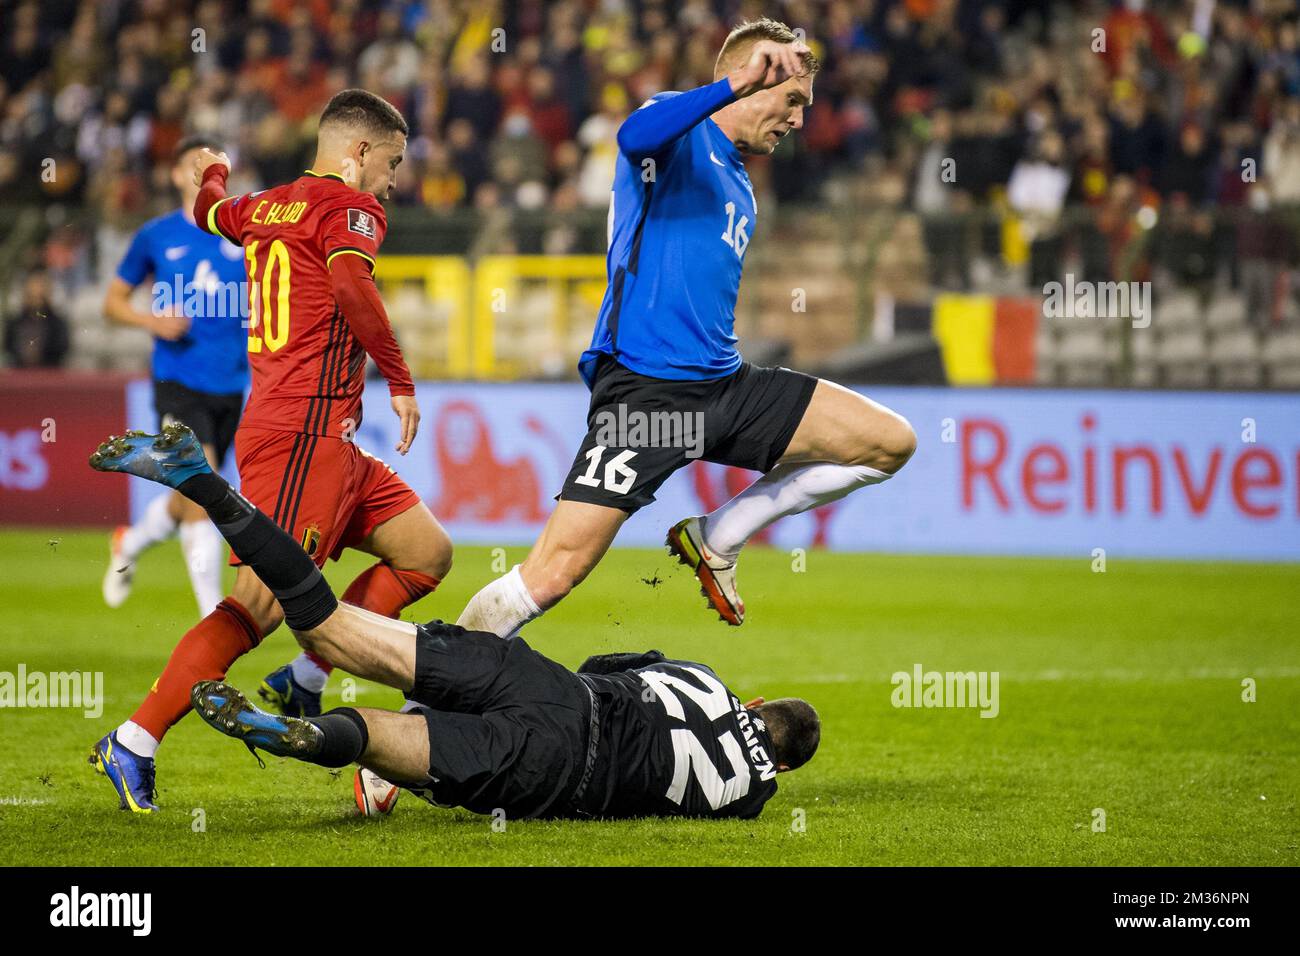 Belgium's Eden Hazard, Estonia's goalkeeper Igonen Matvei and Estonia's Joonas Tamm fight for the ball during a soccer match between Belgian national team the Red Devils and Estonia's national team, in Brussels, Saturday 13 November 2021, game 7 in group E of the qualifications for the 2022 FIFA World Cup. BELGA PHOTO JASPER JACOBS Stock Photo